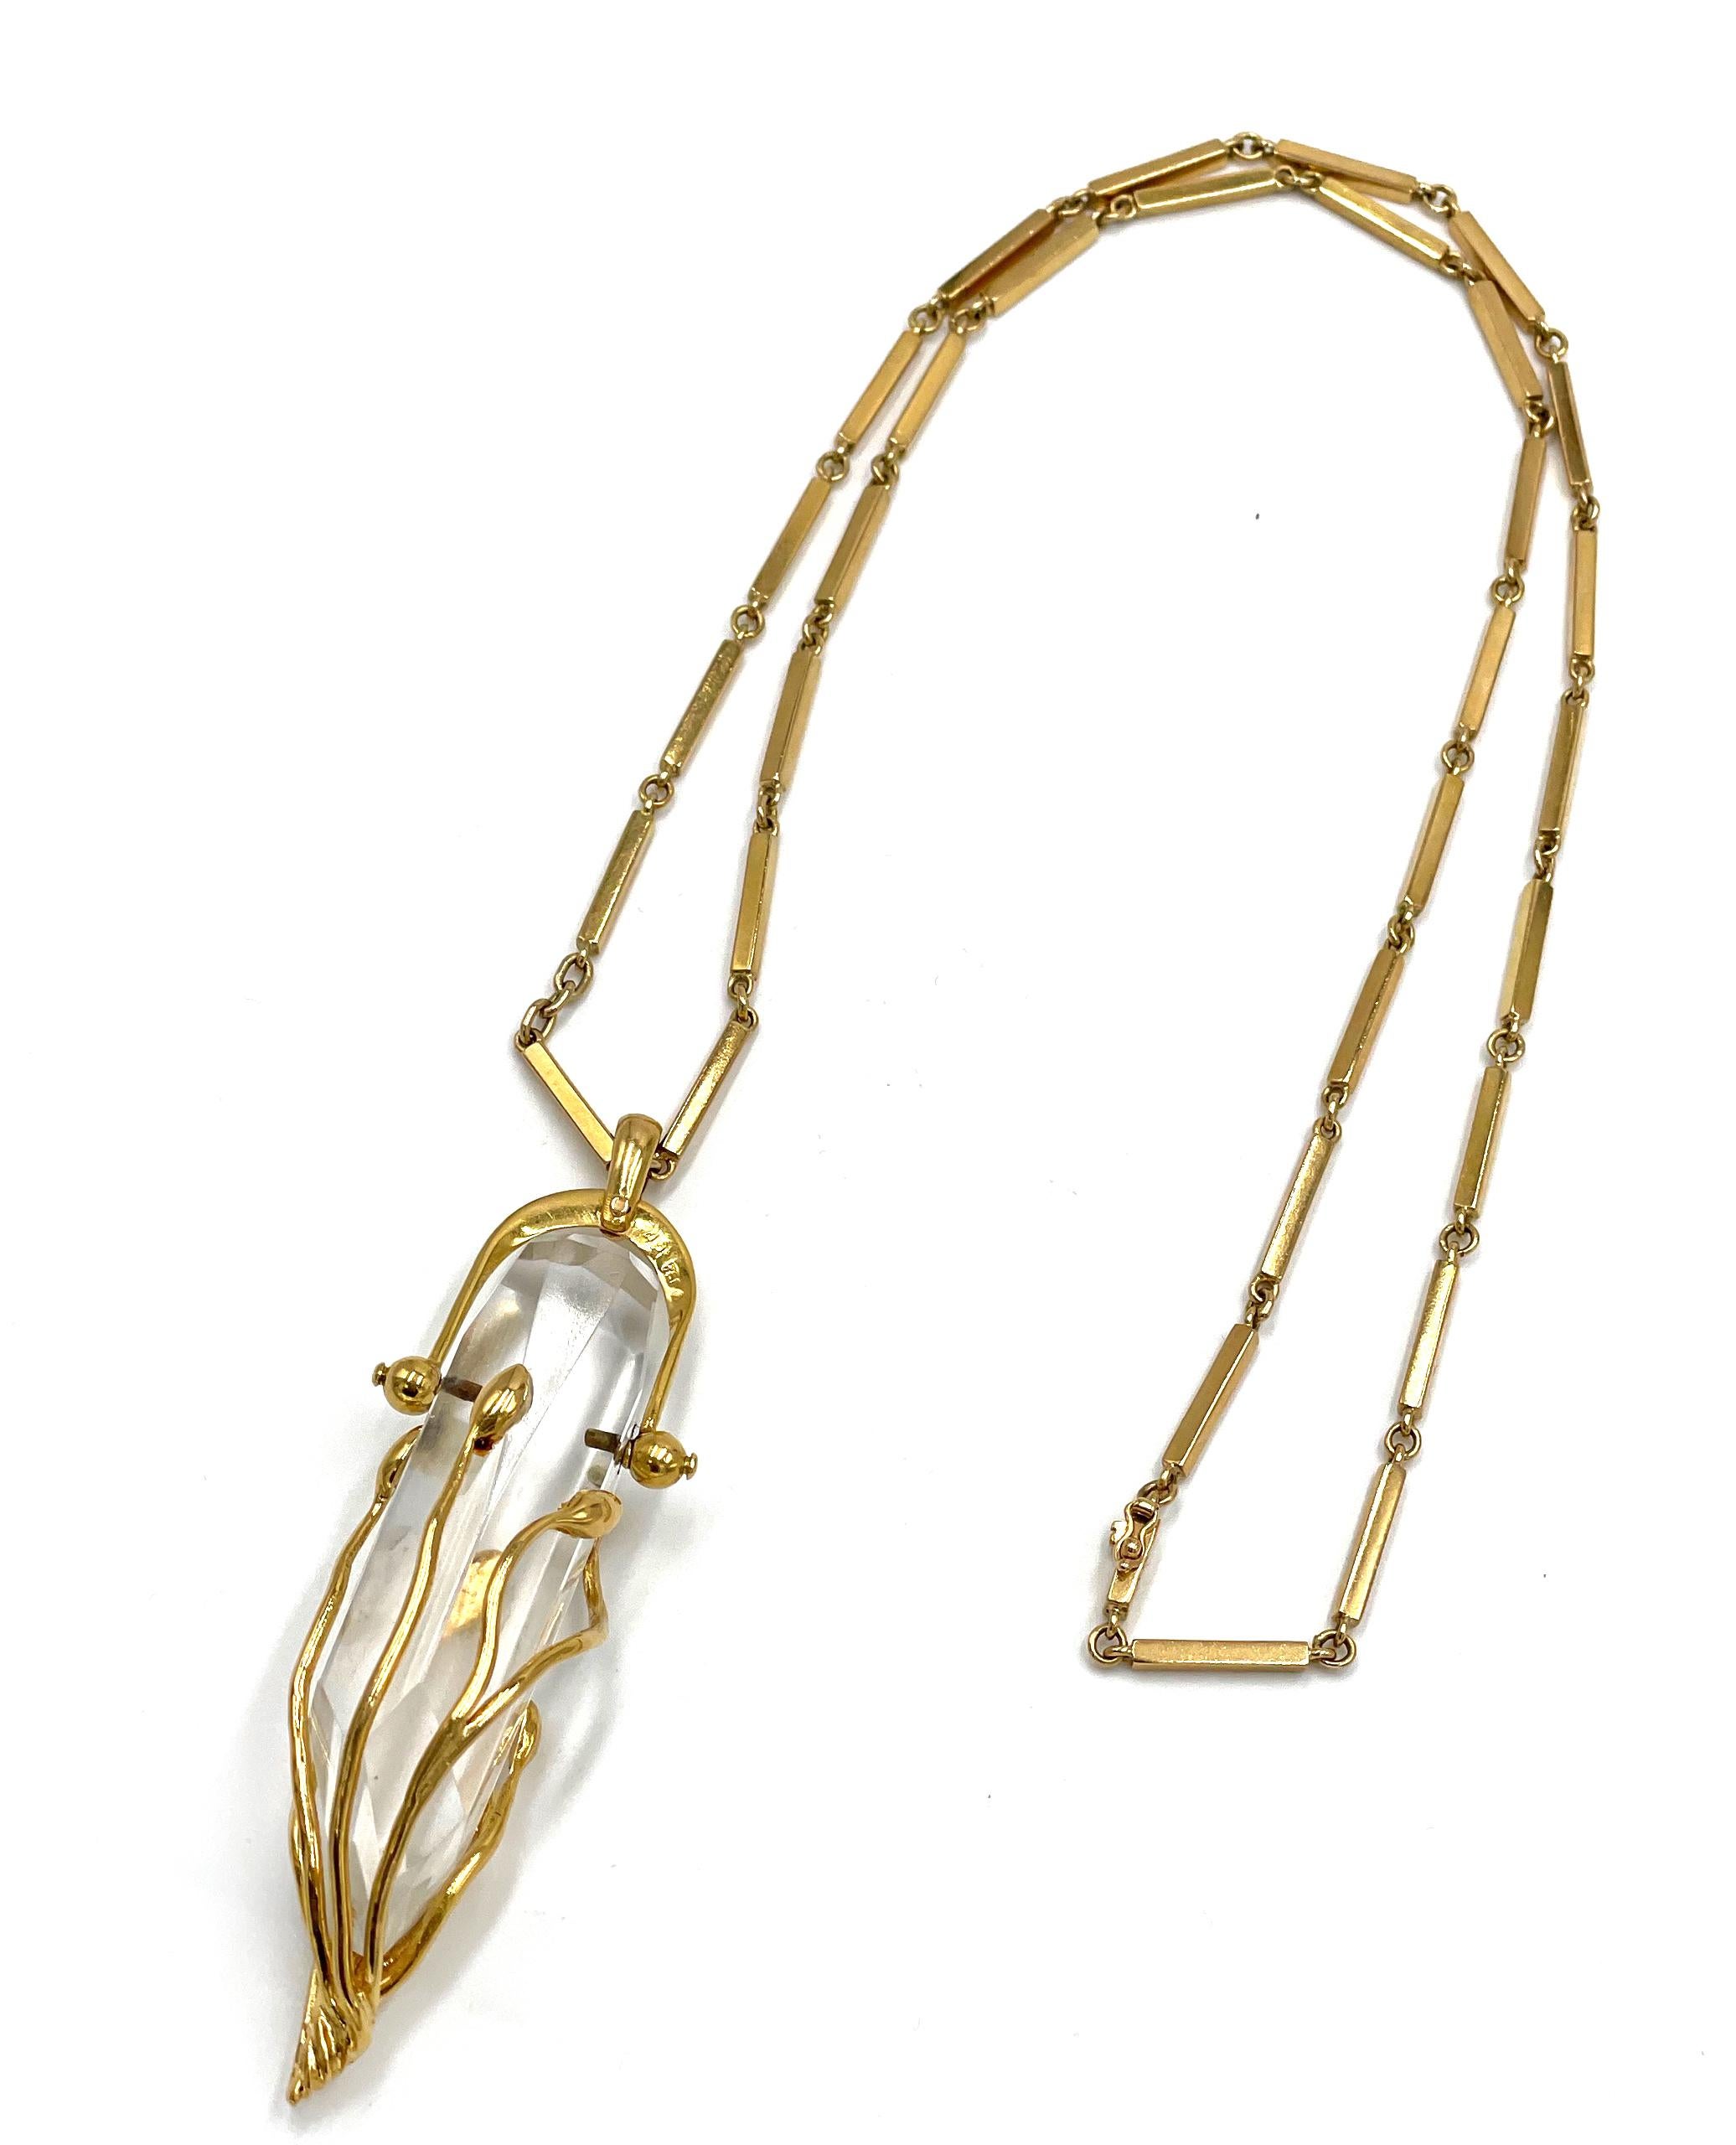 Briolette Cut Hand Crafted 18K Yellow Gold and Quartz Crystal Drop Necklace For Sale